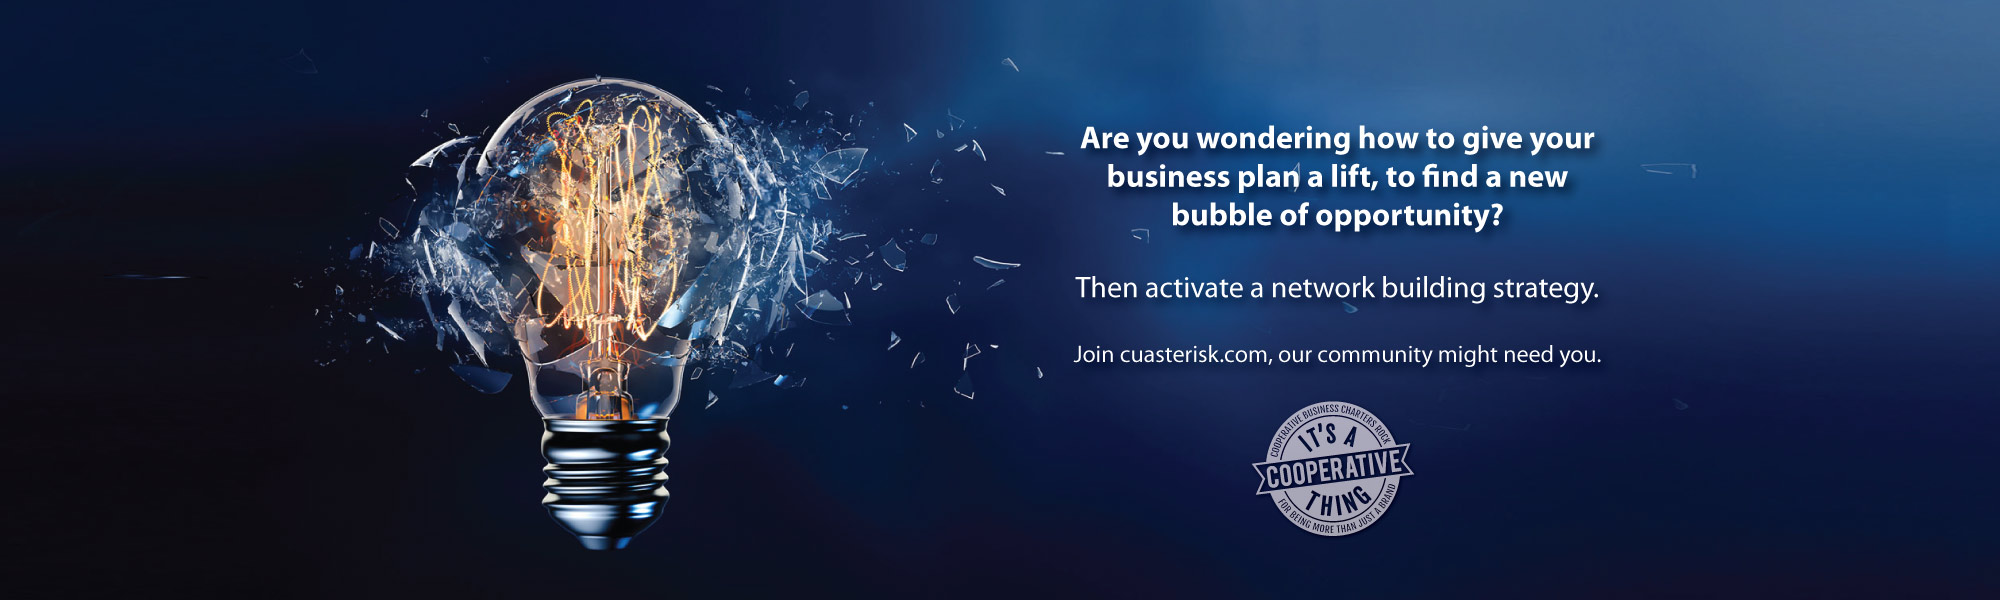 Are you wondering how to give your business plan a lift, to find a new bubble of opportunity? Join cuasterisk.com, our community might need you.